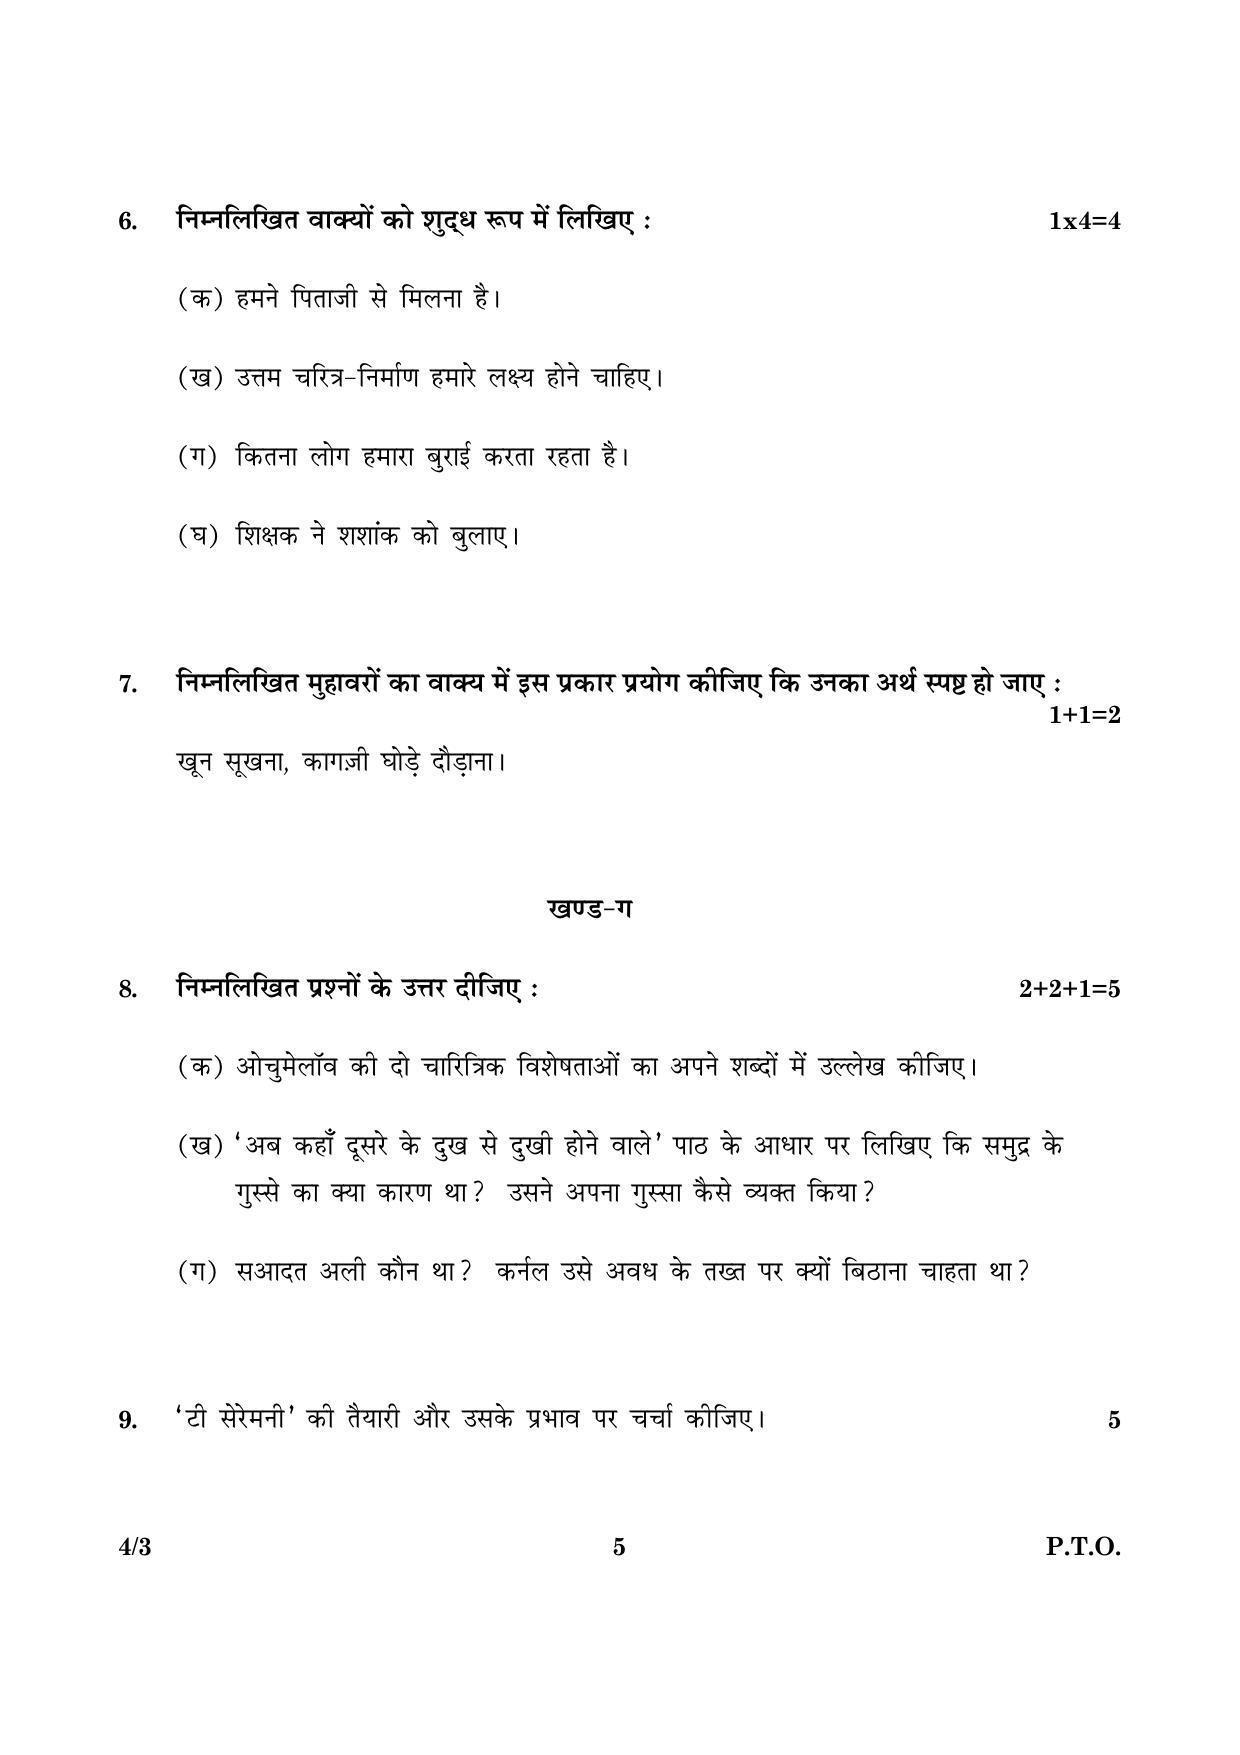 CBSE Class 10 004 Set 3 Hindi Course B 2016 Question Paper - Page 5